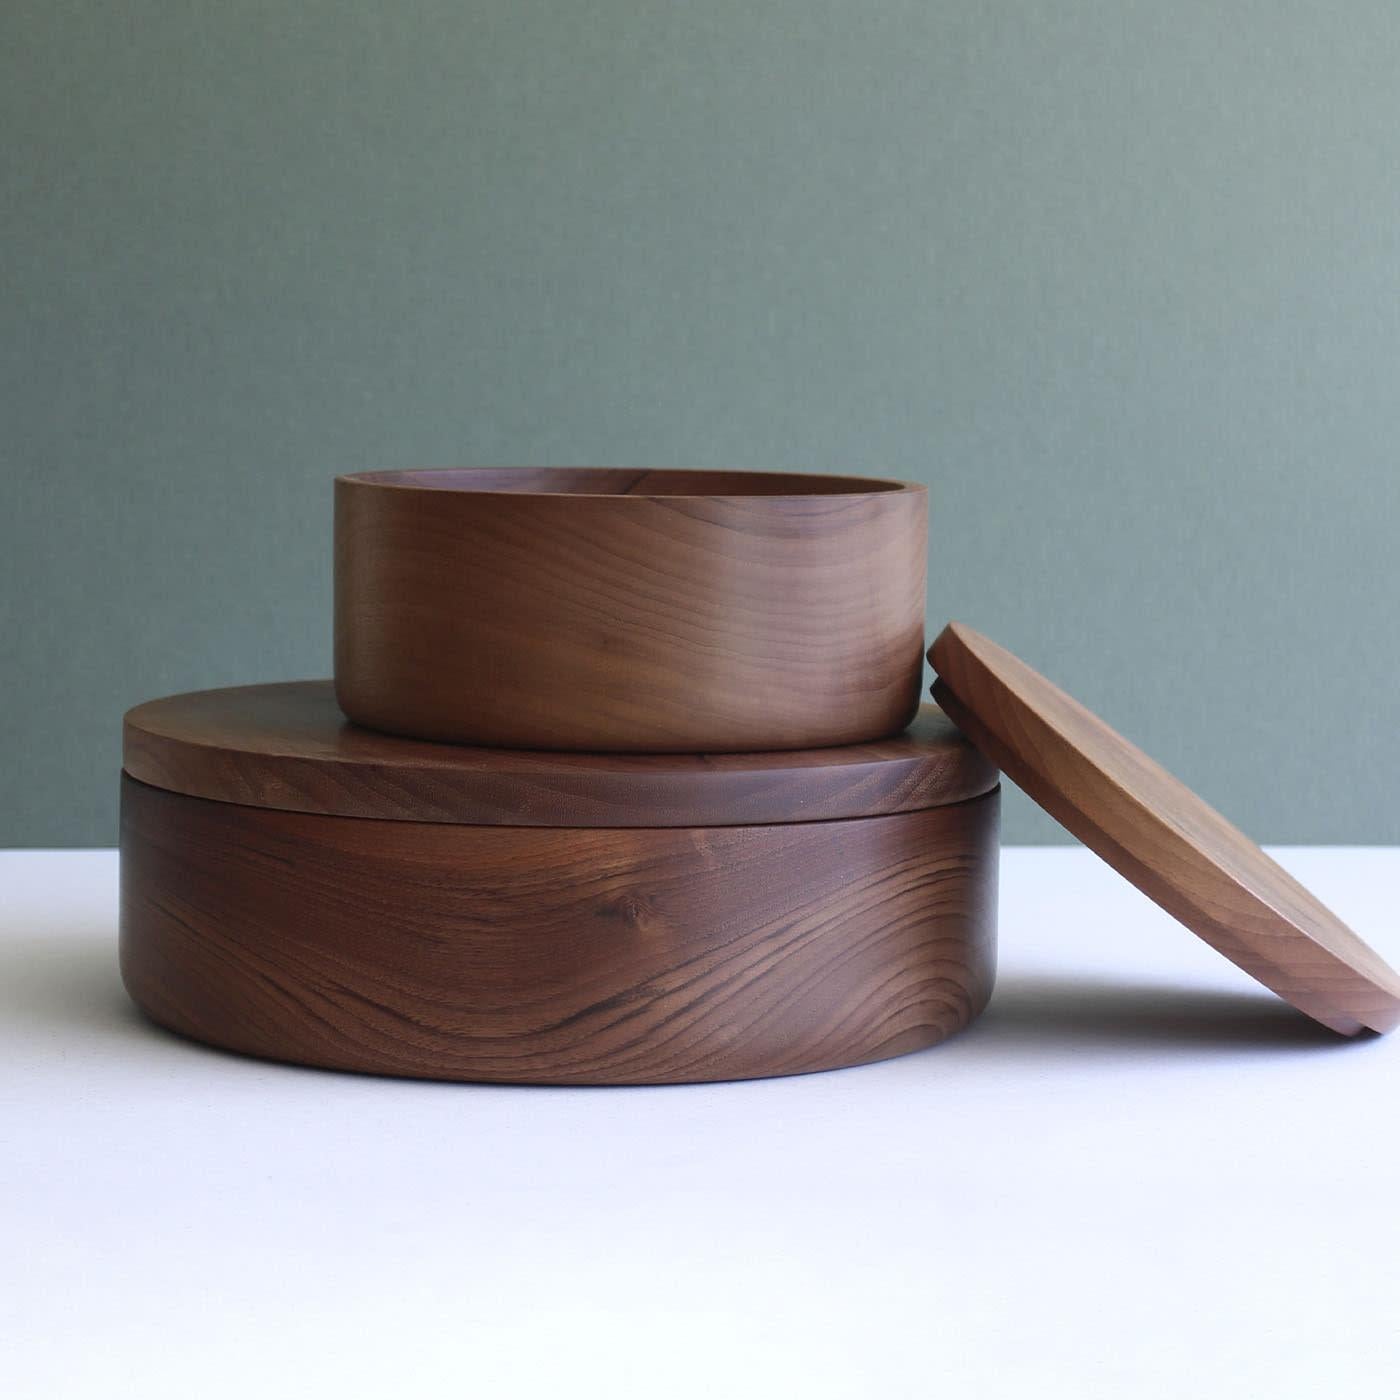 A spot-on nest for small tortillas, this handcrafted cylindrical box offered in solid walnut comes with a flat lid at once sealing its minimalist silhouette and unadorned elegance. The exclusive use of natural wood - traced with specific food-safe